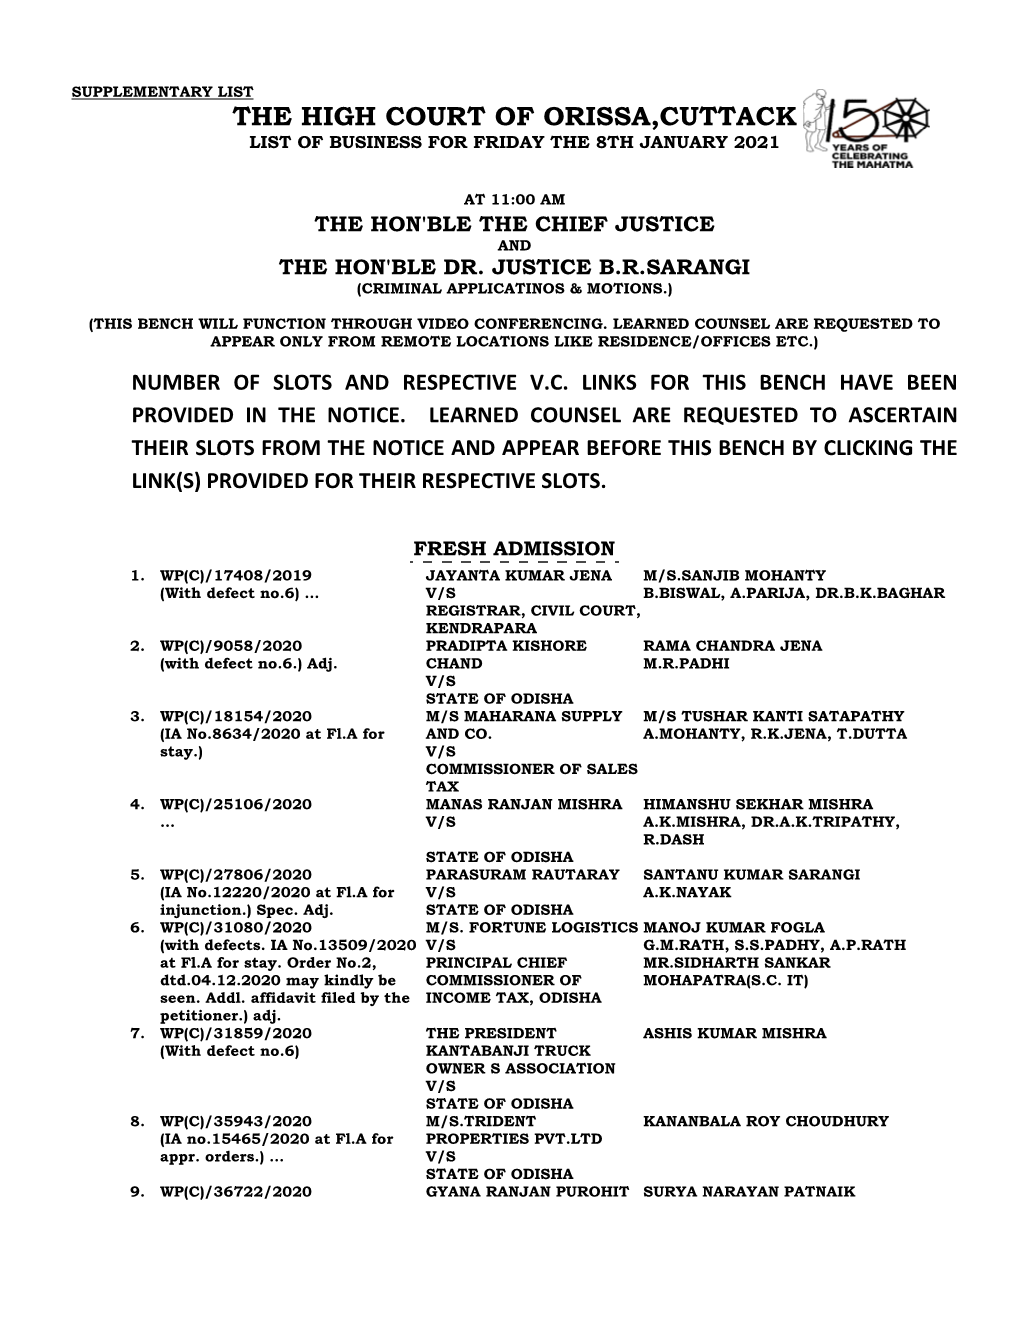 The High Court of Orissa,Cuttack List of Business for Friday the 8Th January 2021